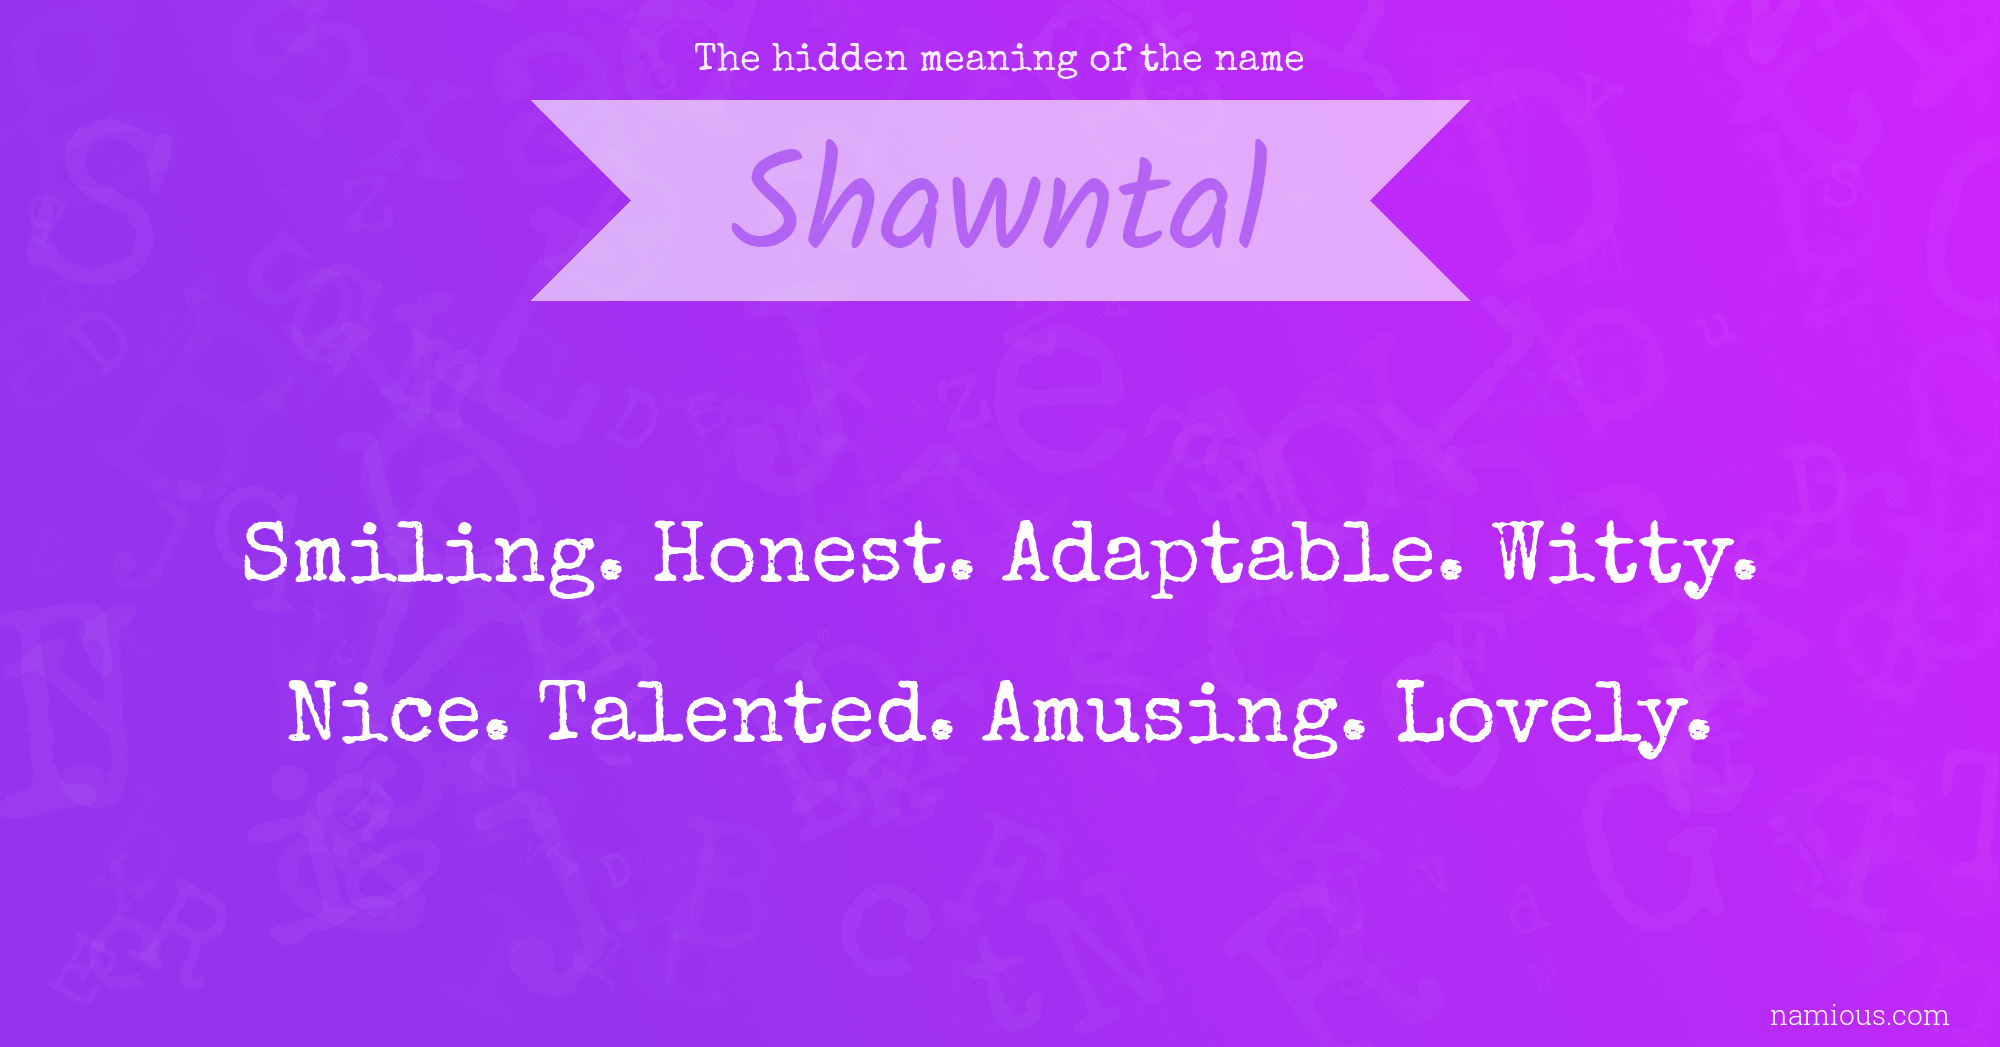 The hidden meaning of the name Shawntal